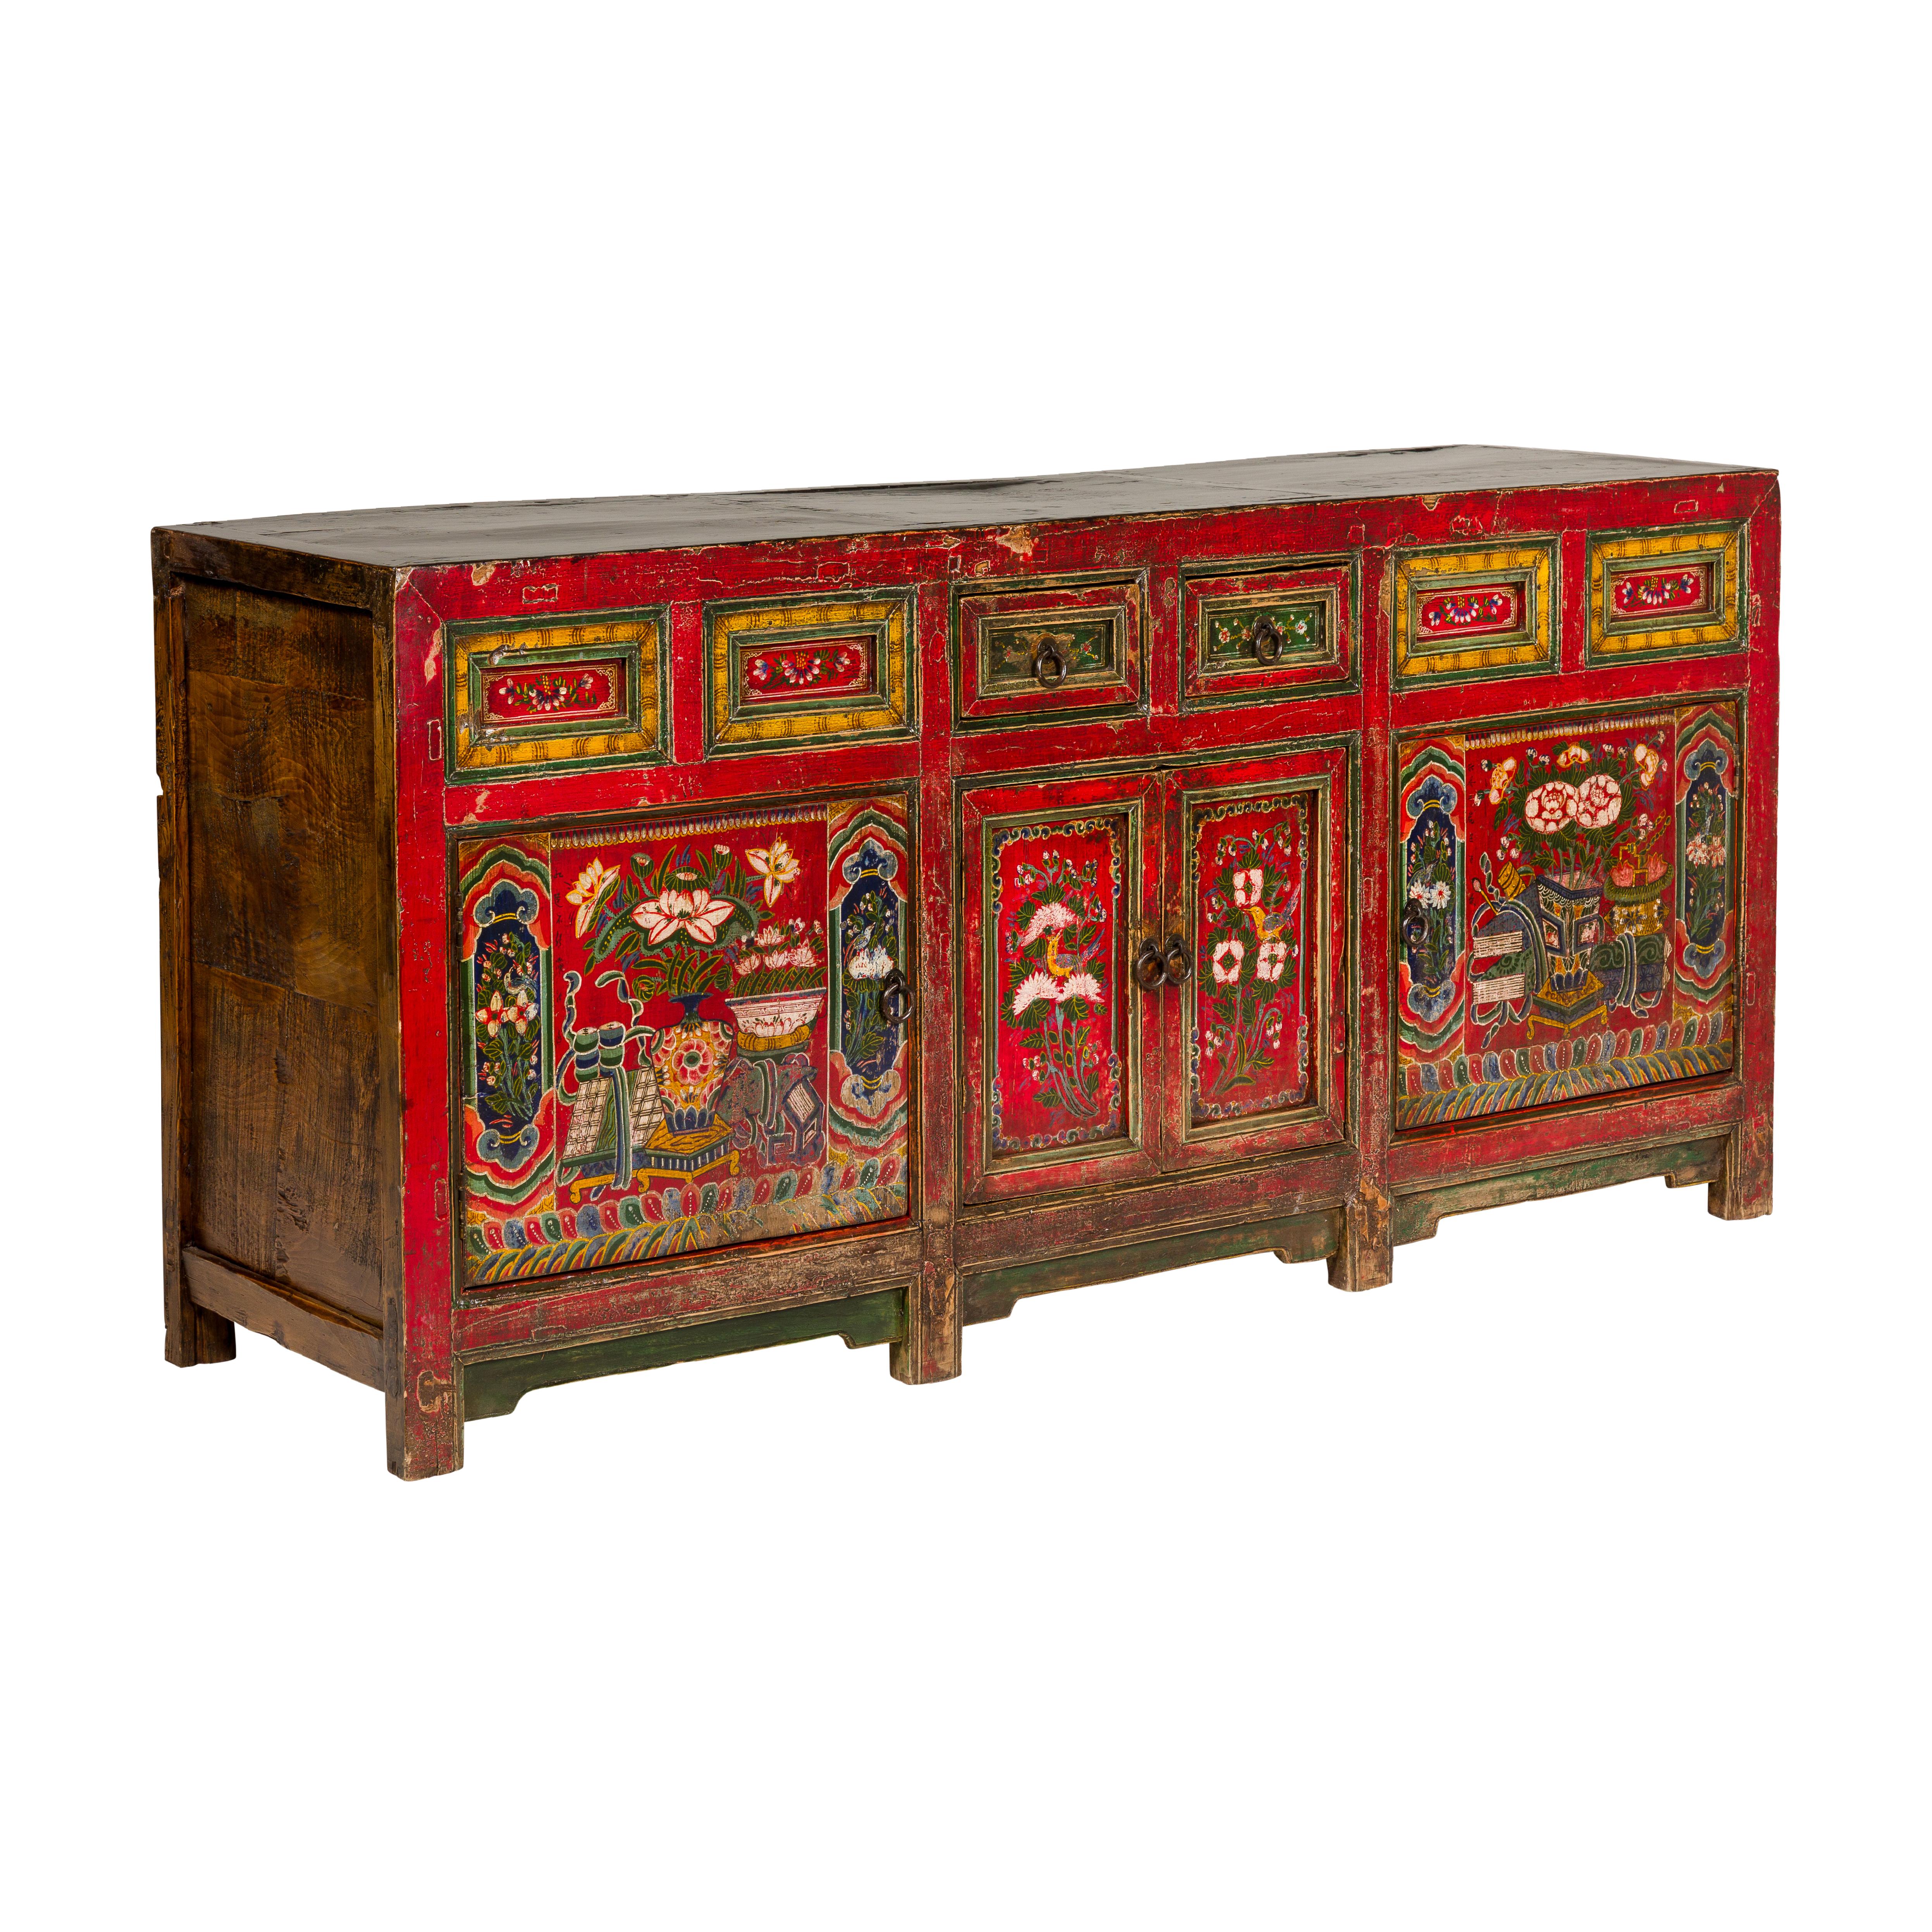 19th Century Mongolian Polychrome Sideboard with Doors, Drawers and Floral Décor For Sale 14